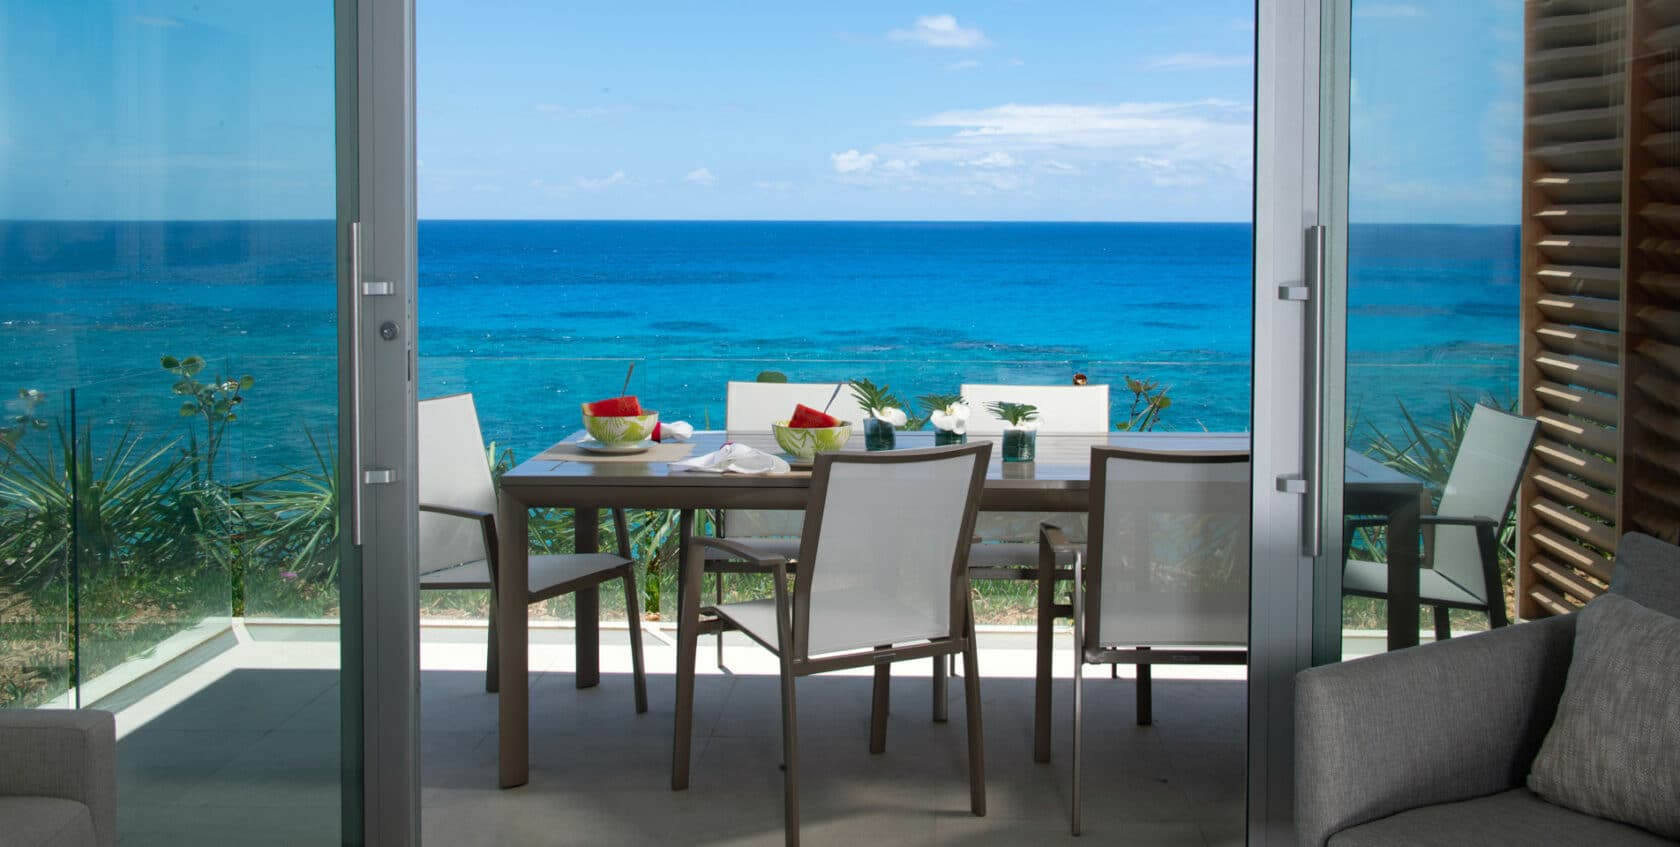 A patio with a dining table set with watermelon, with an ocean view in the background.